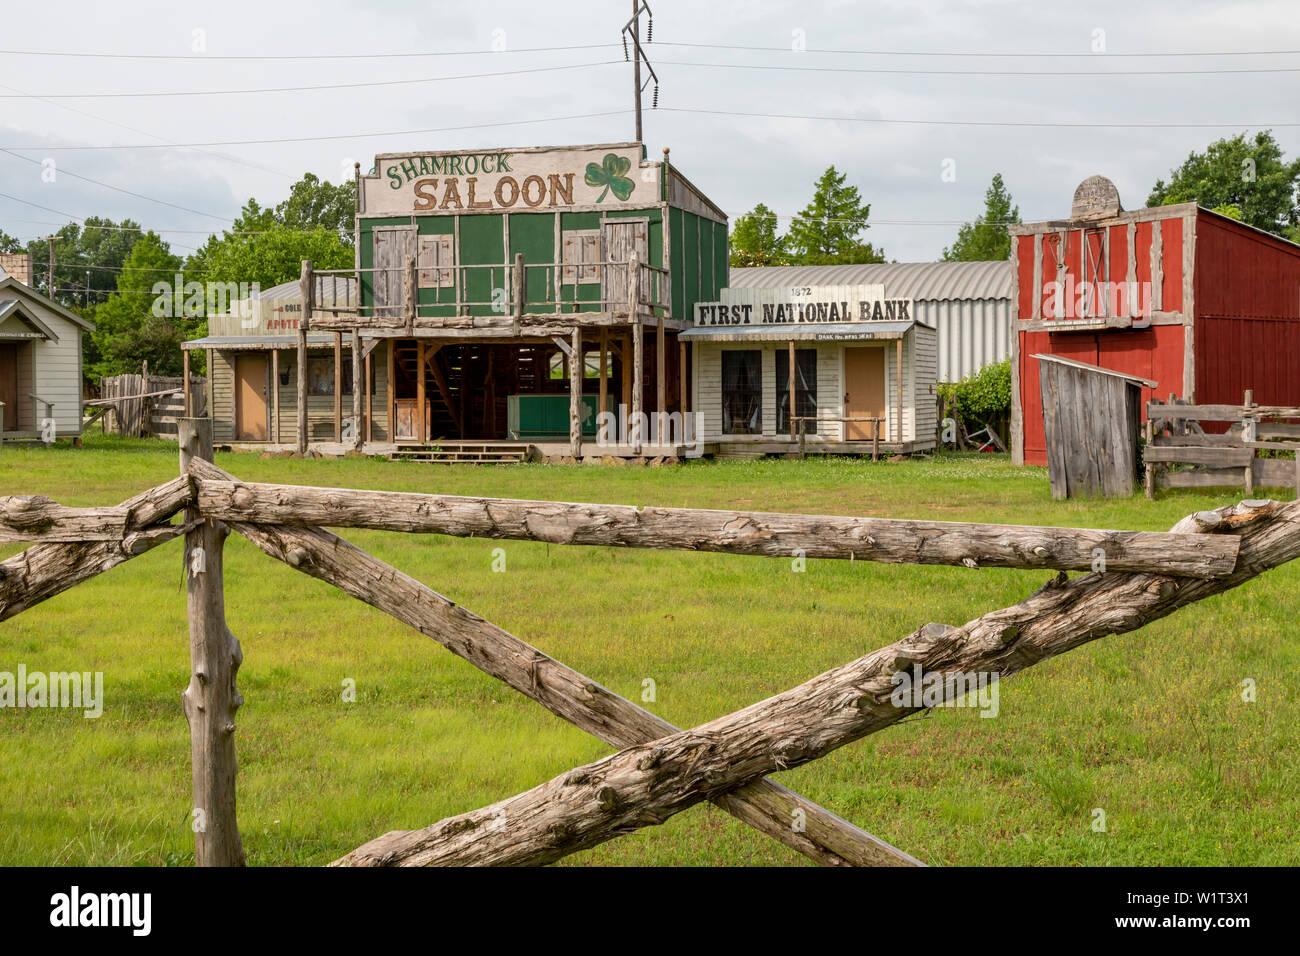 Fort Smith, Arkansas - The Lawbreakers 'n Peacemakers Theatre, a facility designed for historical reenactments of the region's 19th century history. Stock Photo